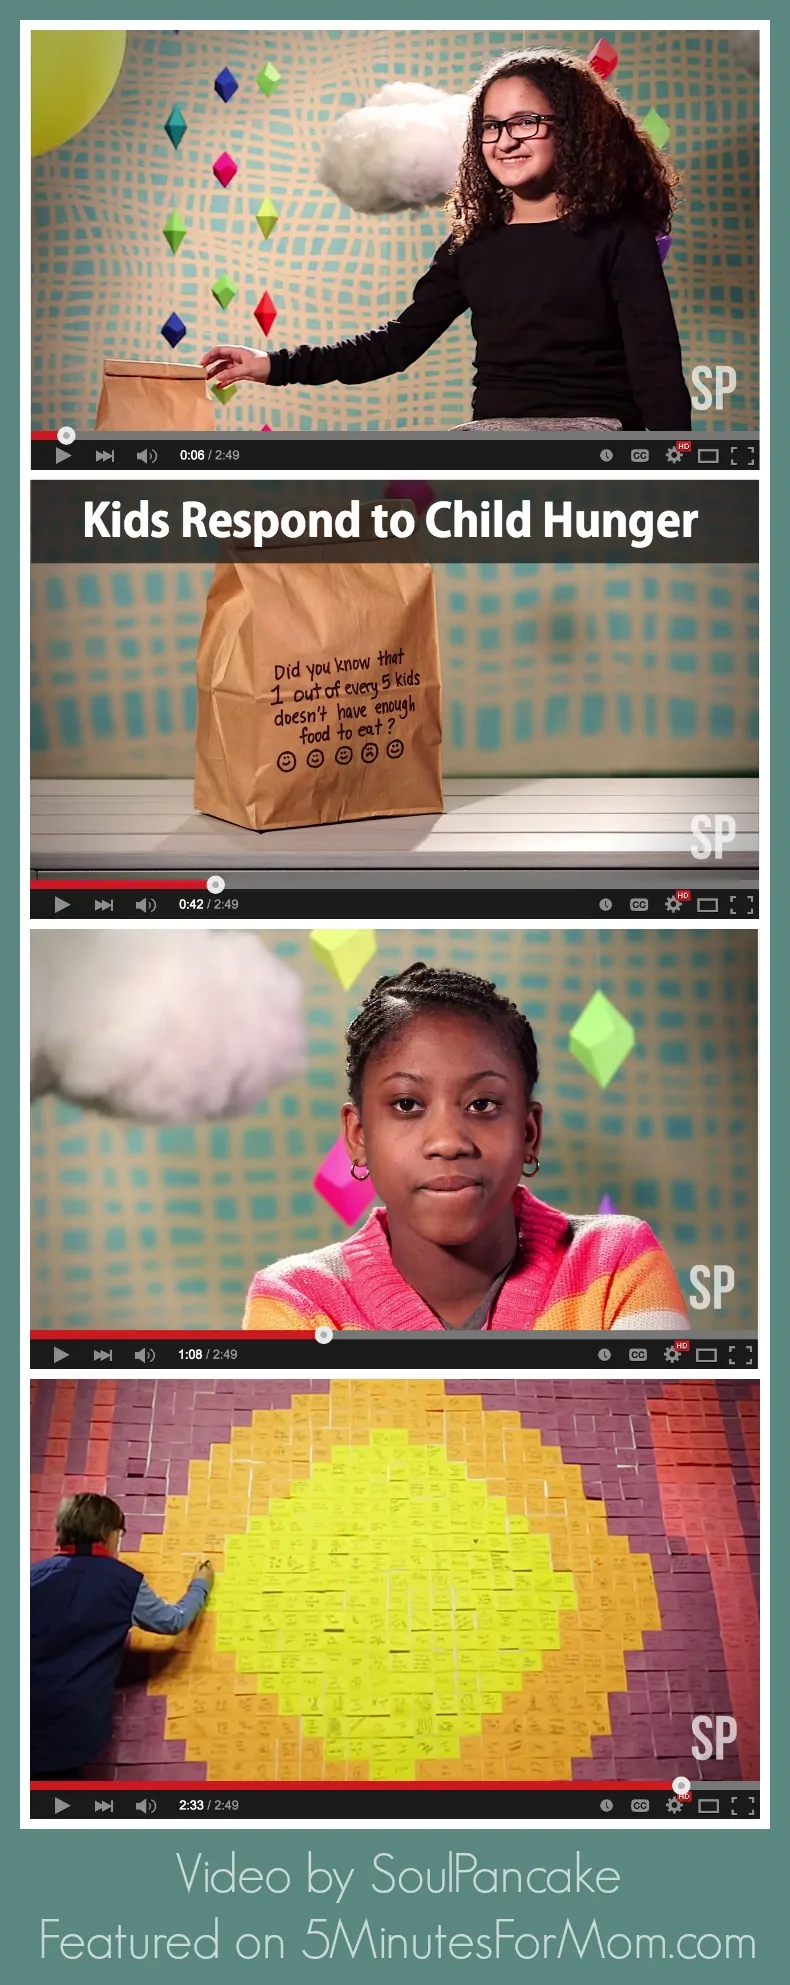 Kids Respond to Child Hunger by SoulPancake